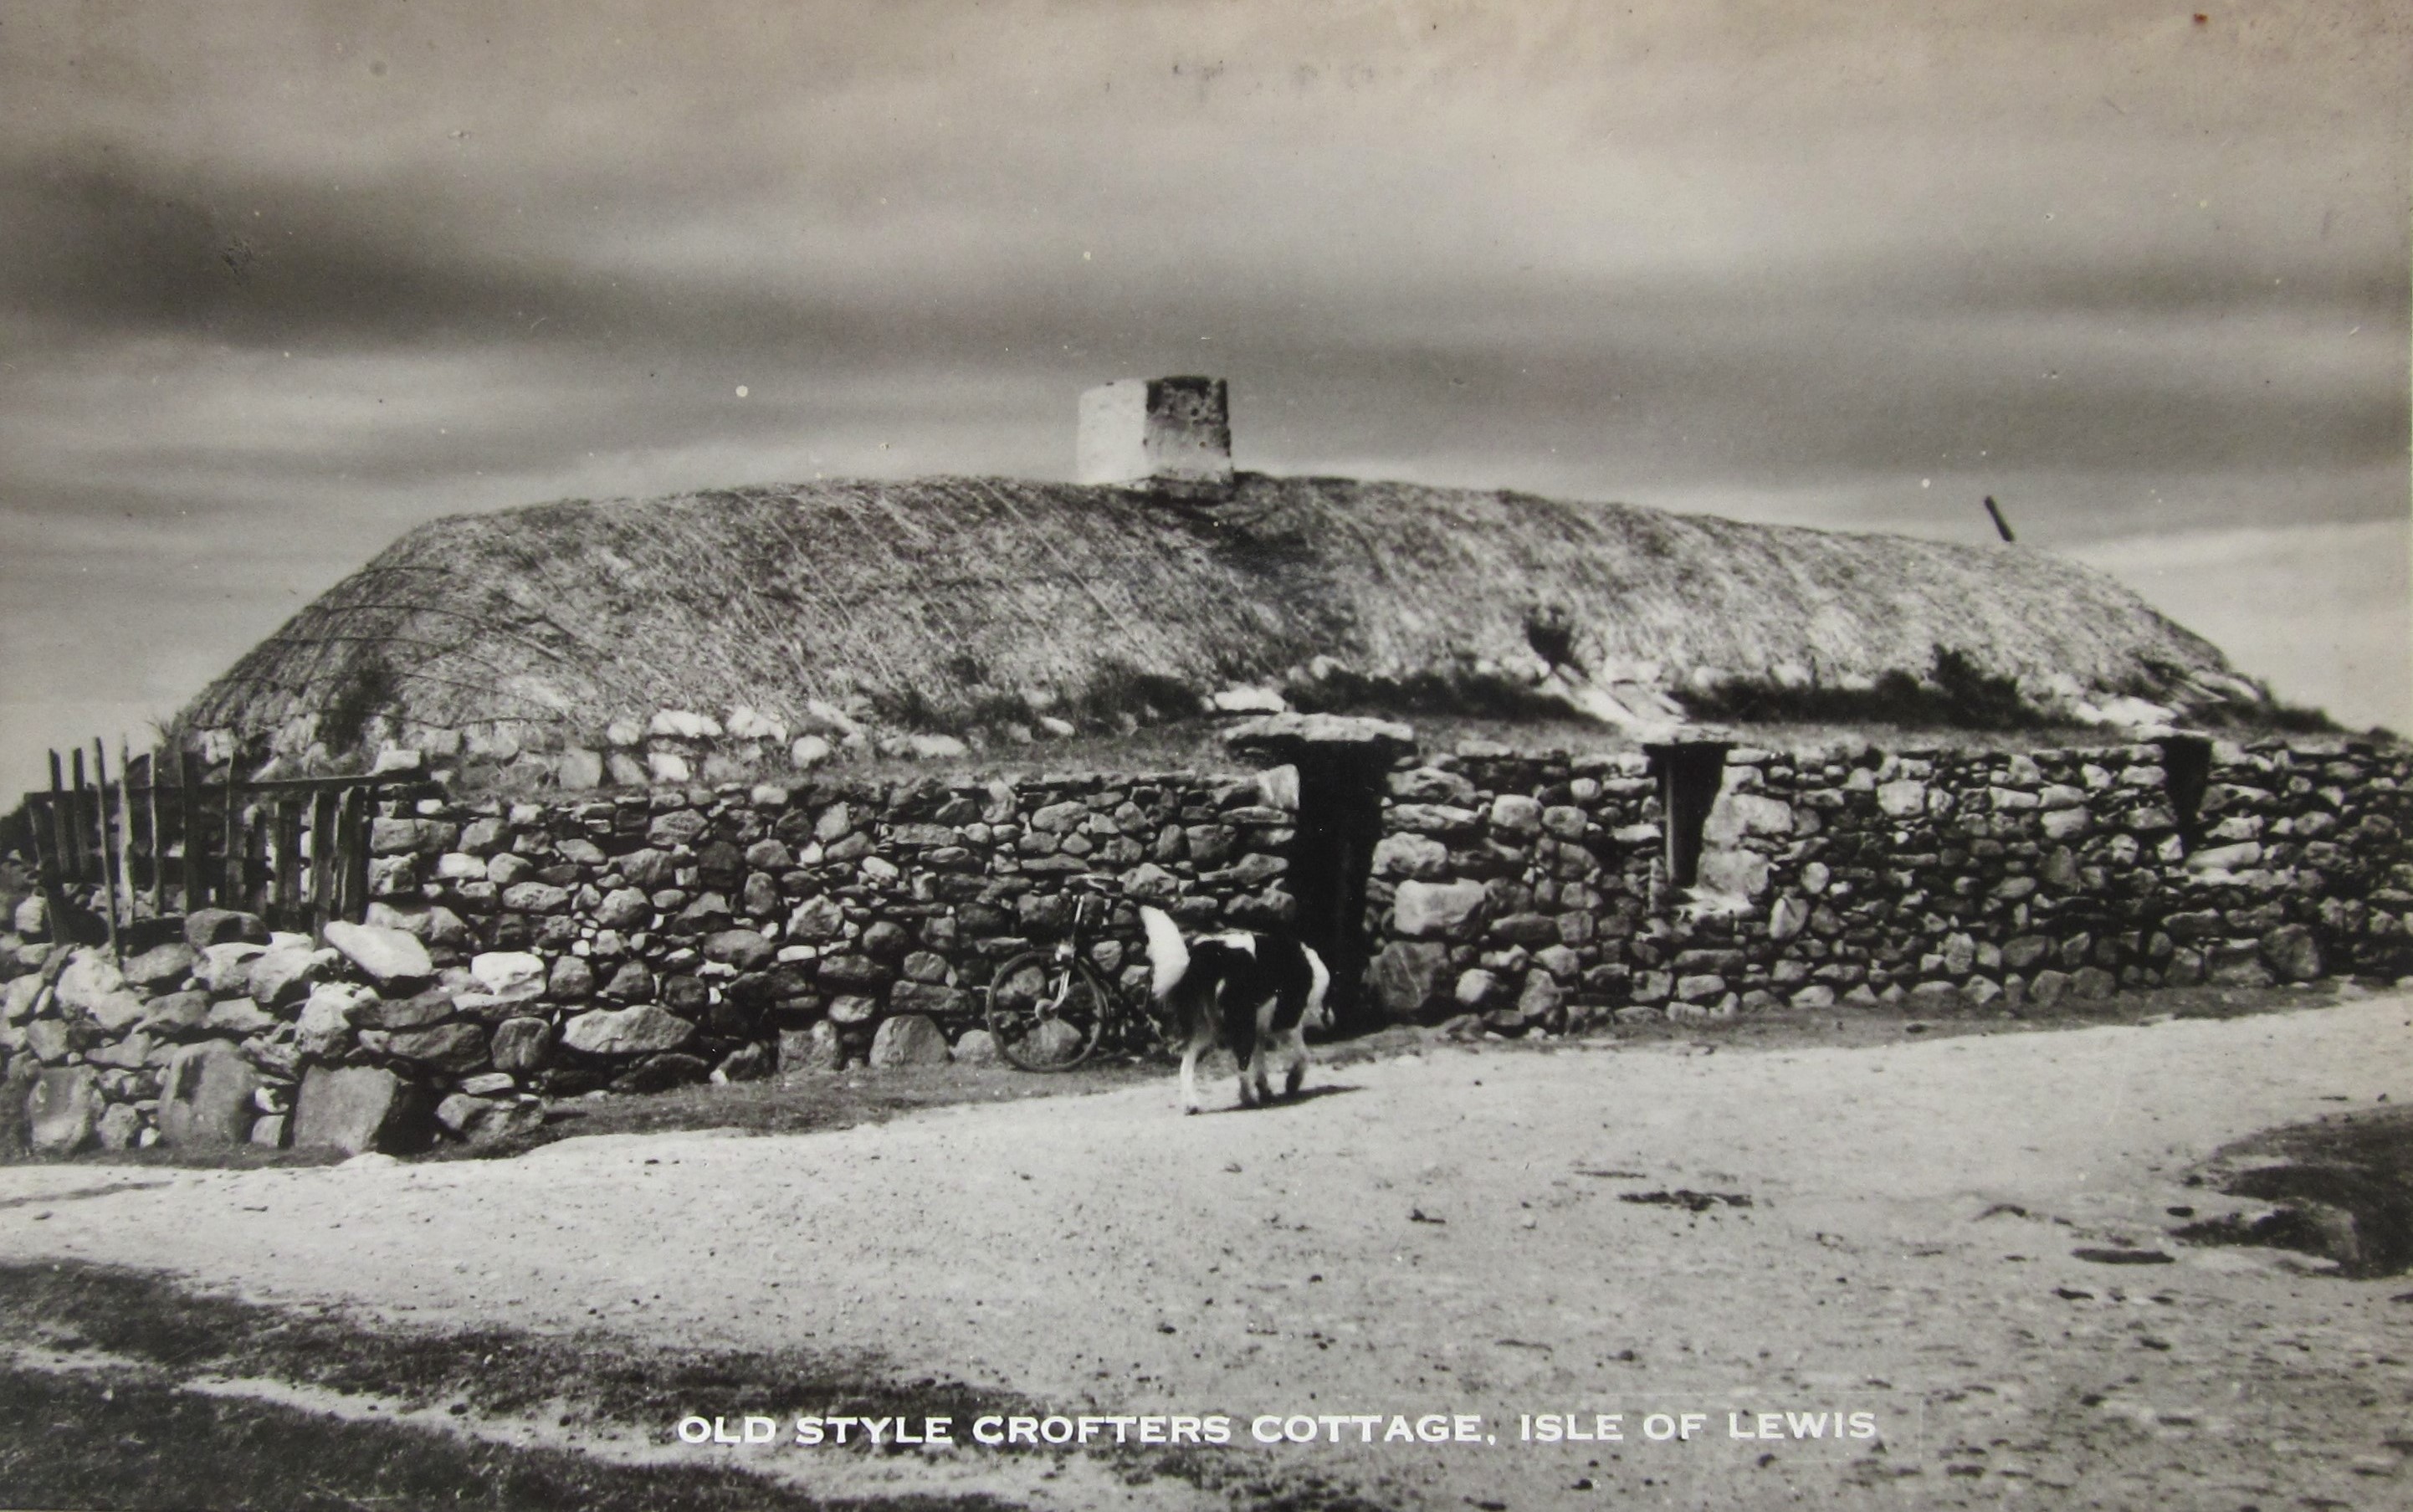 Old style Crofter's Cottage, Isle of Lewis